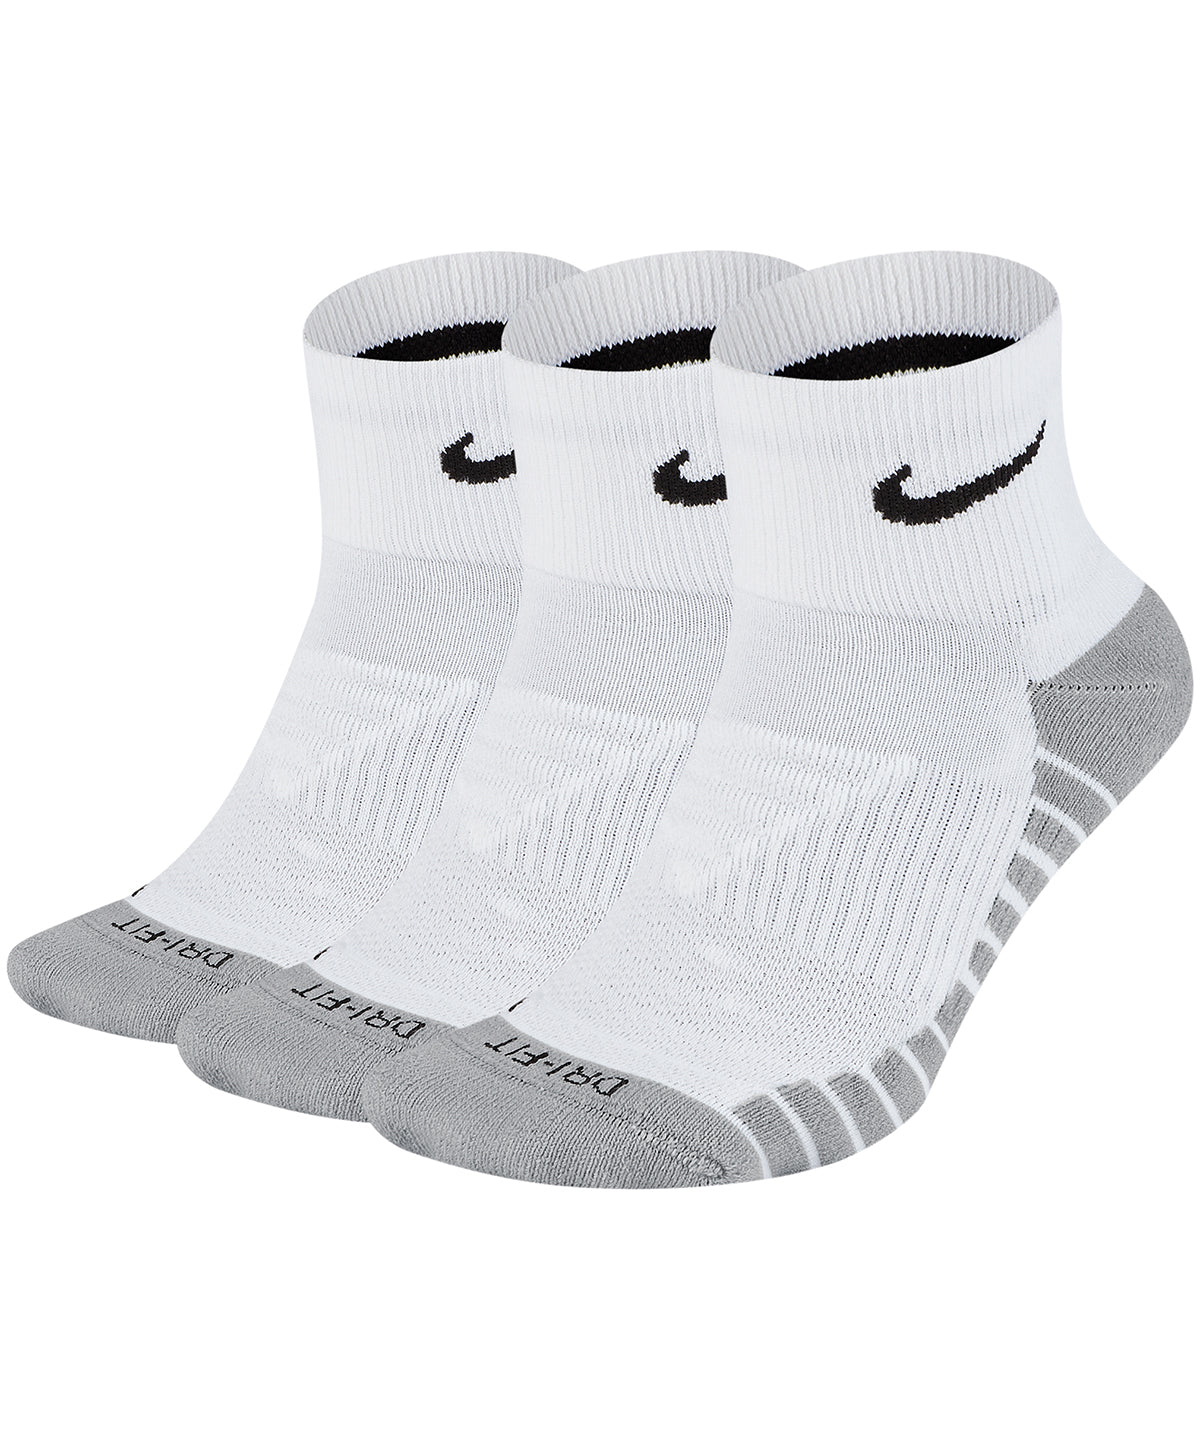 Nike everyday max cushioned ankle sock